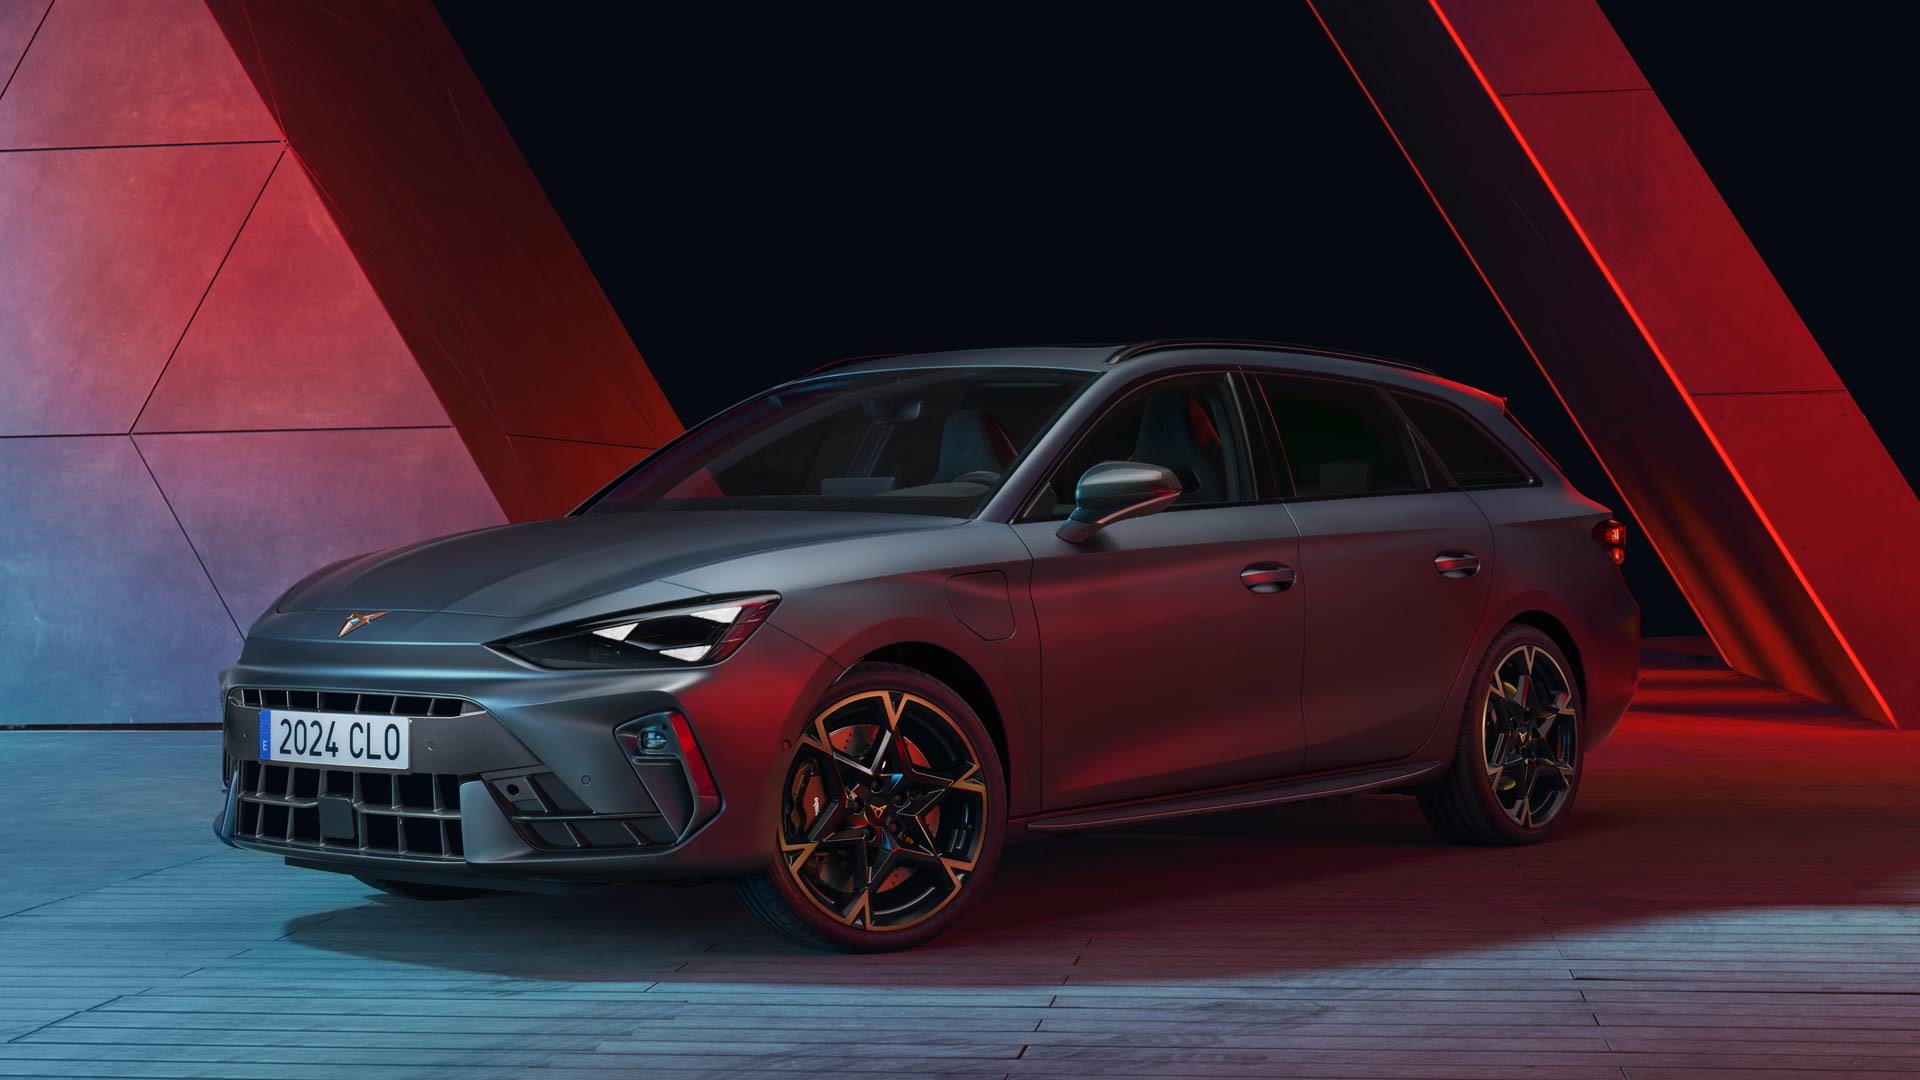 cupra unveils bold new look for sporty leon and formentor